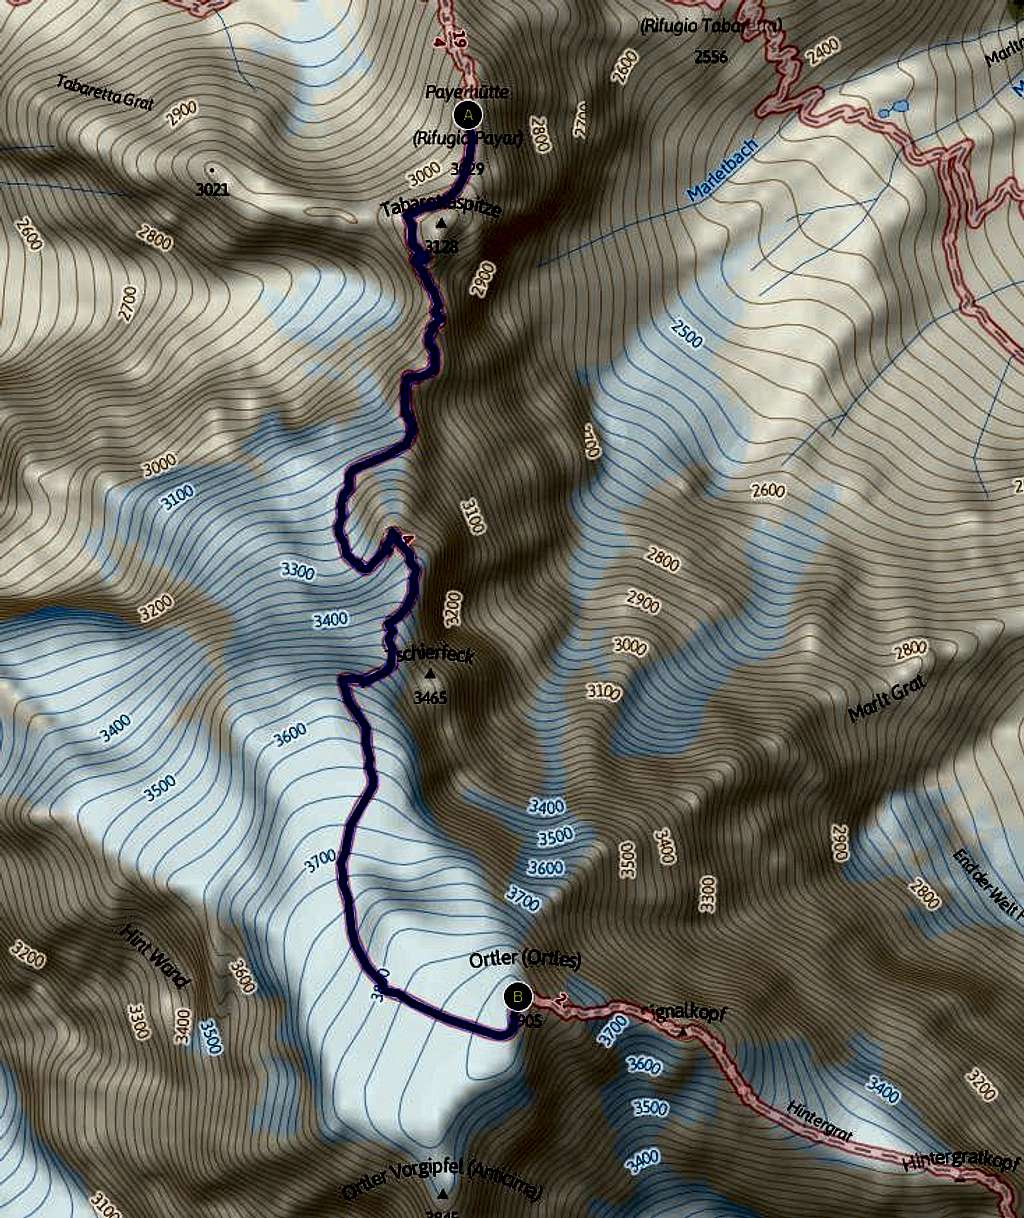 Ortler Normal Route MAP